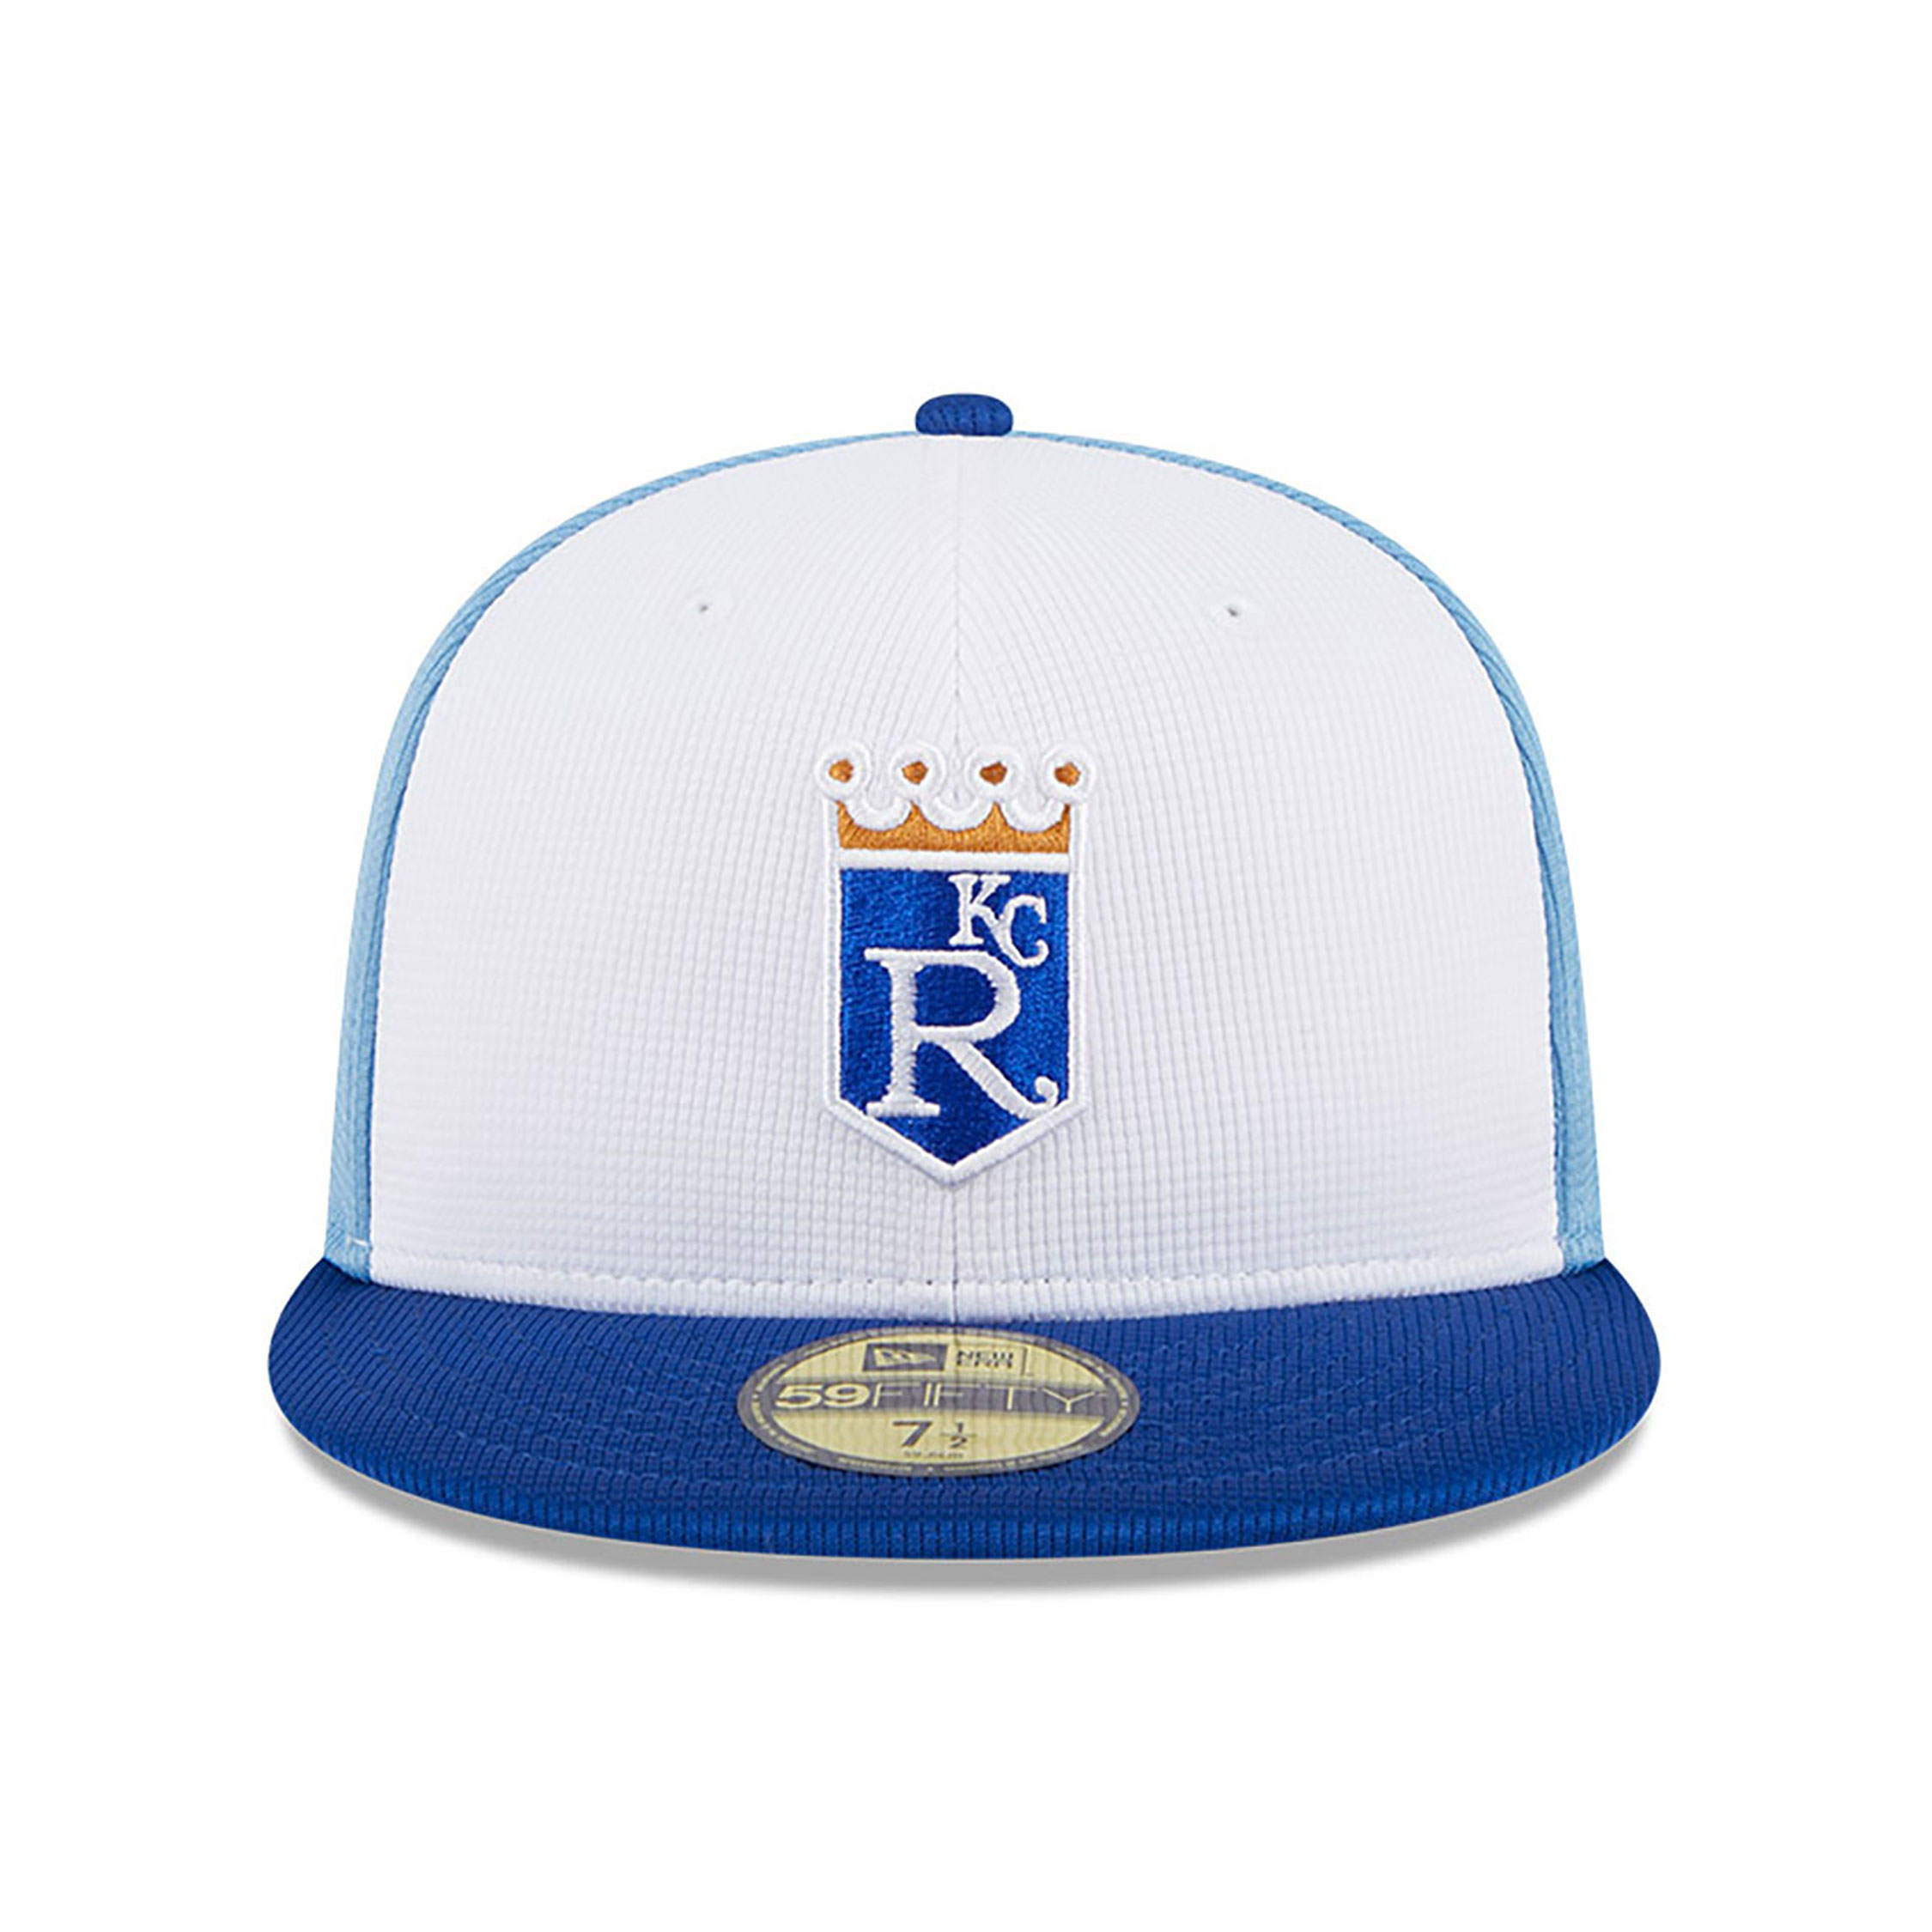 Kansas City Royals MLB Batting Practice Blue 59FIFTY Fitted Cap